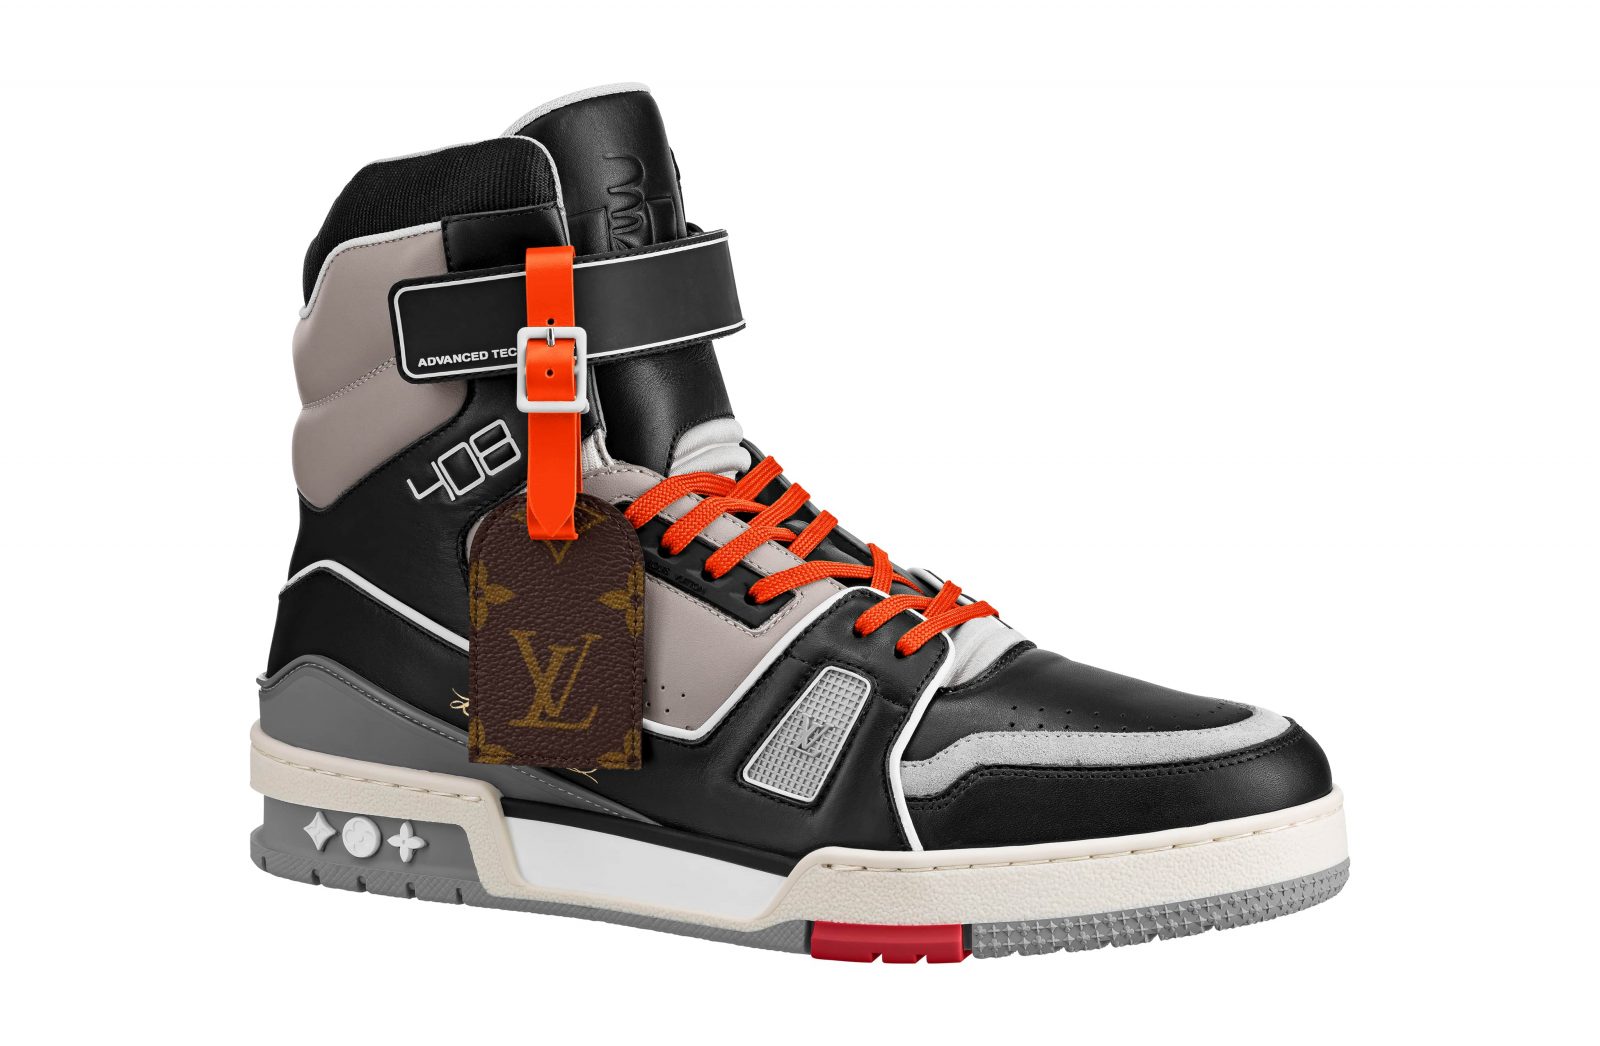 Furious drum Beverage First Look At Louis Vuitton's 408 Global Trainers & Sneaker Trunk